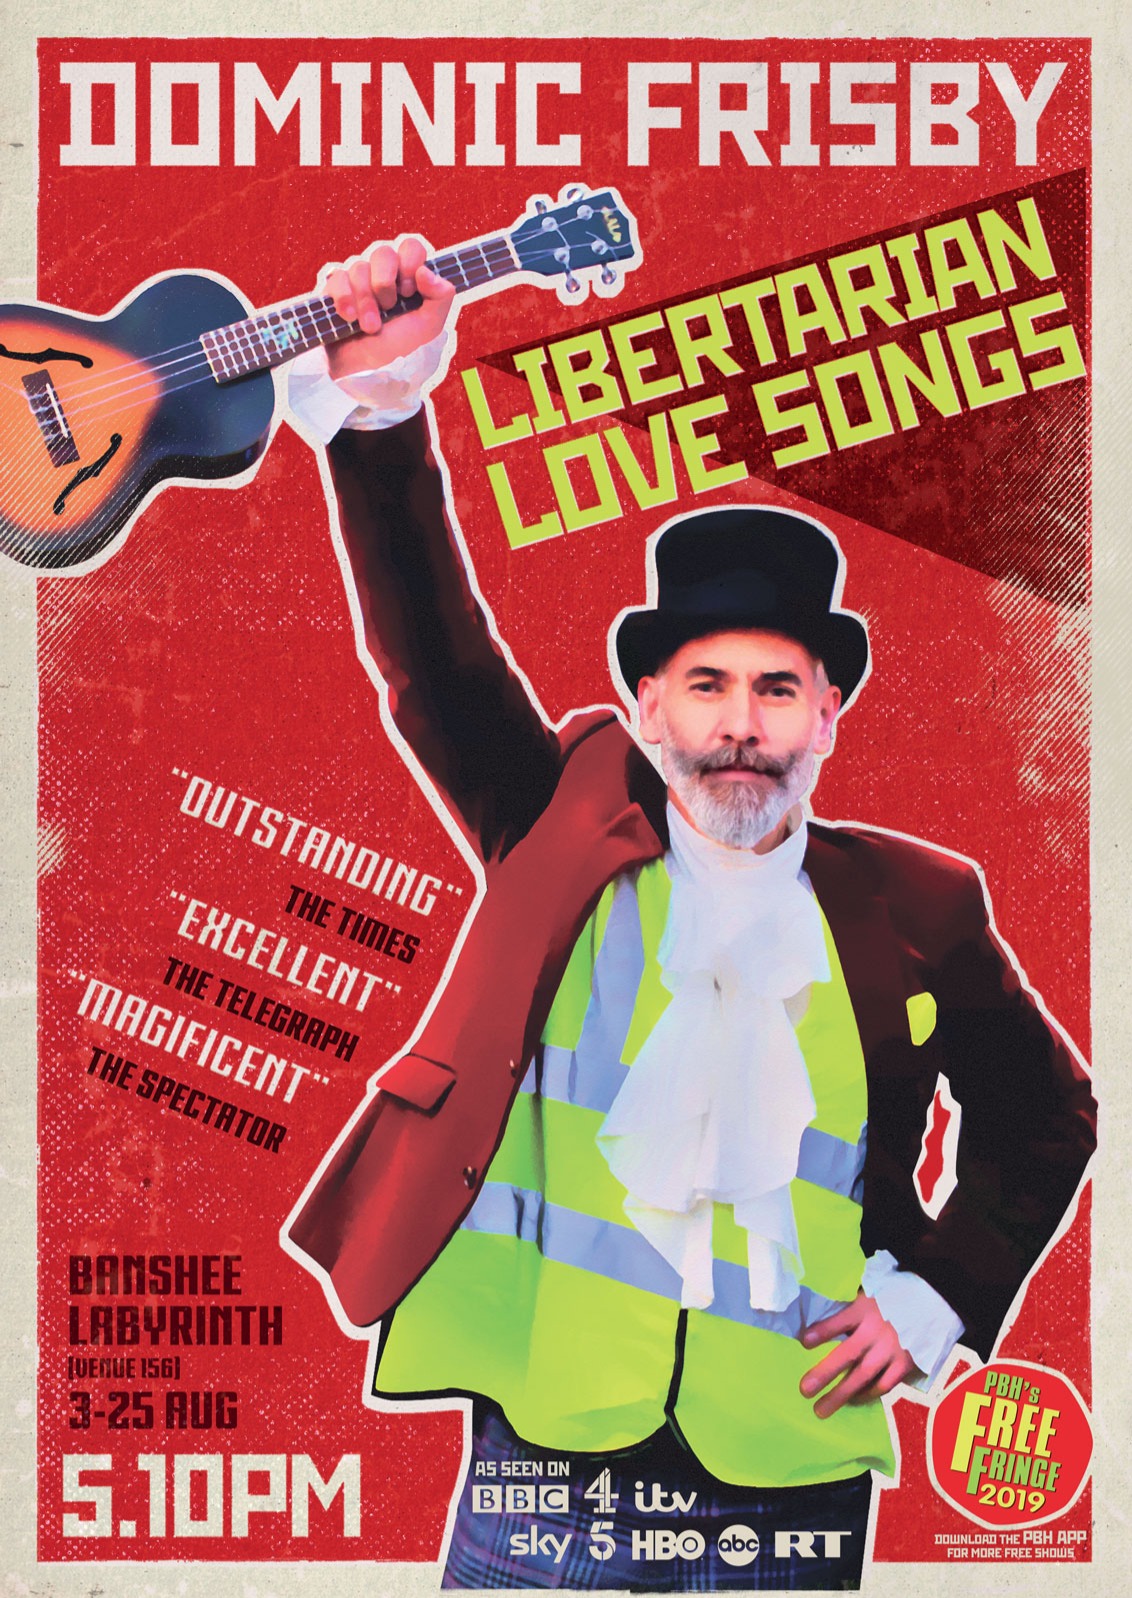 The poster for Dominic Frisby: Libertarian Love Songs